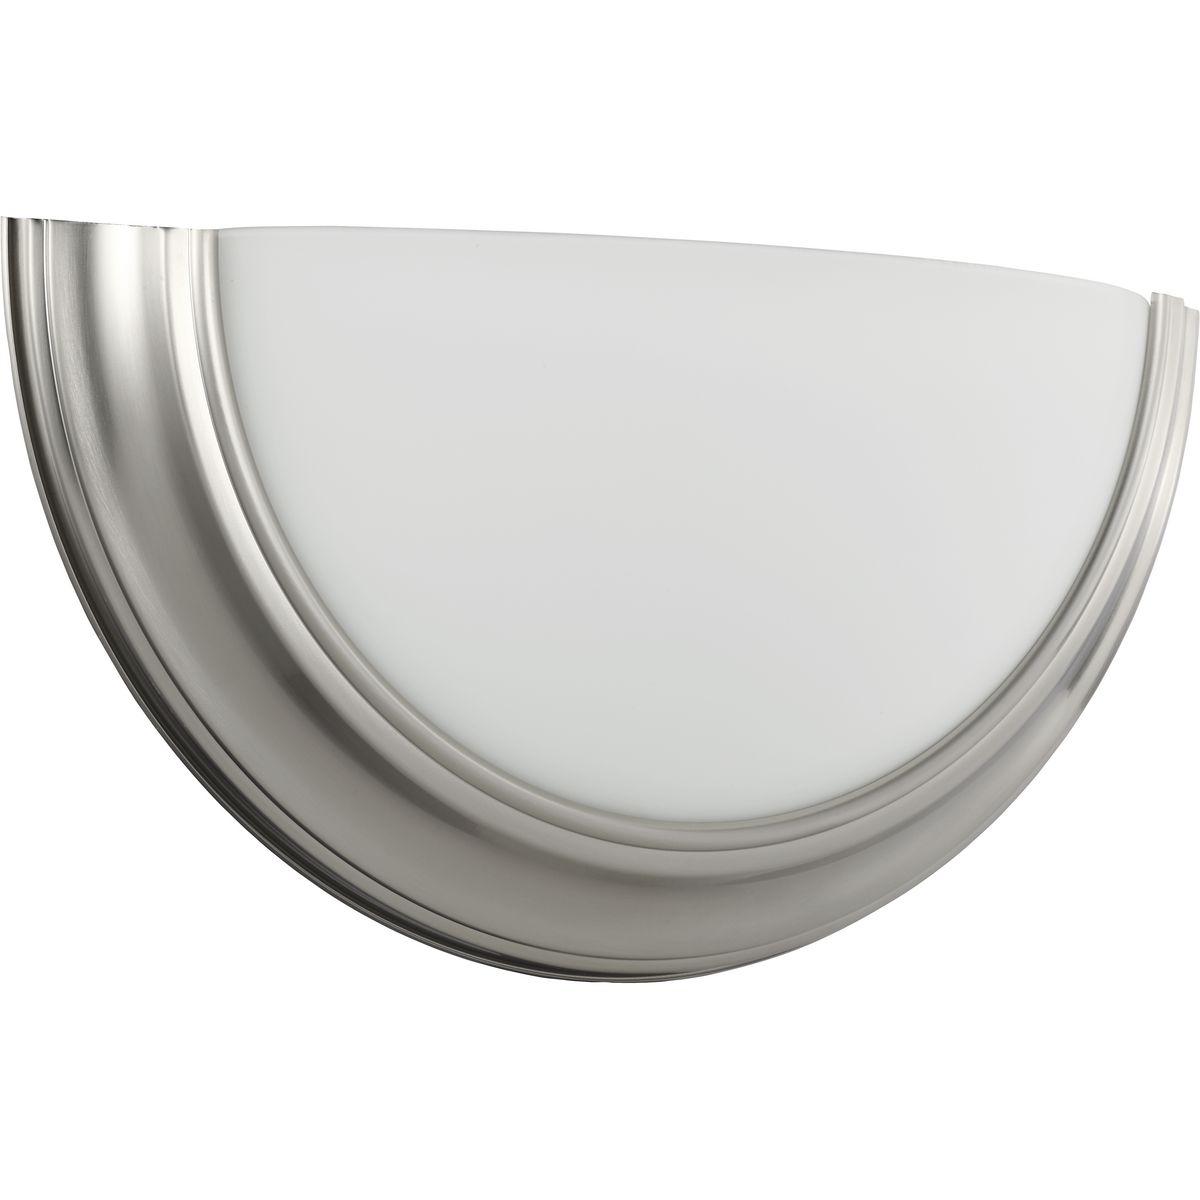 Hubbell P710090-009-30 This wall sconce offers contemporary styling perfect for residential and commercial settings. A satin white glass shade as been crafted in a captivating half-moon silhouette. The shade is cradled in a beveled brushed nickel metal frame for a classic touch